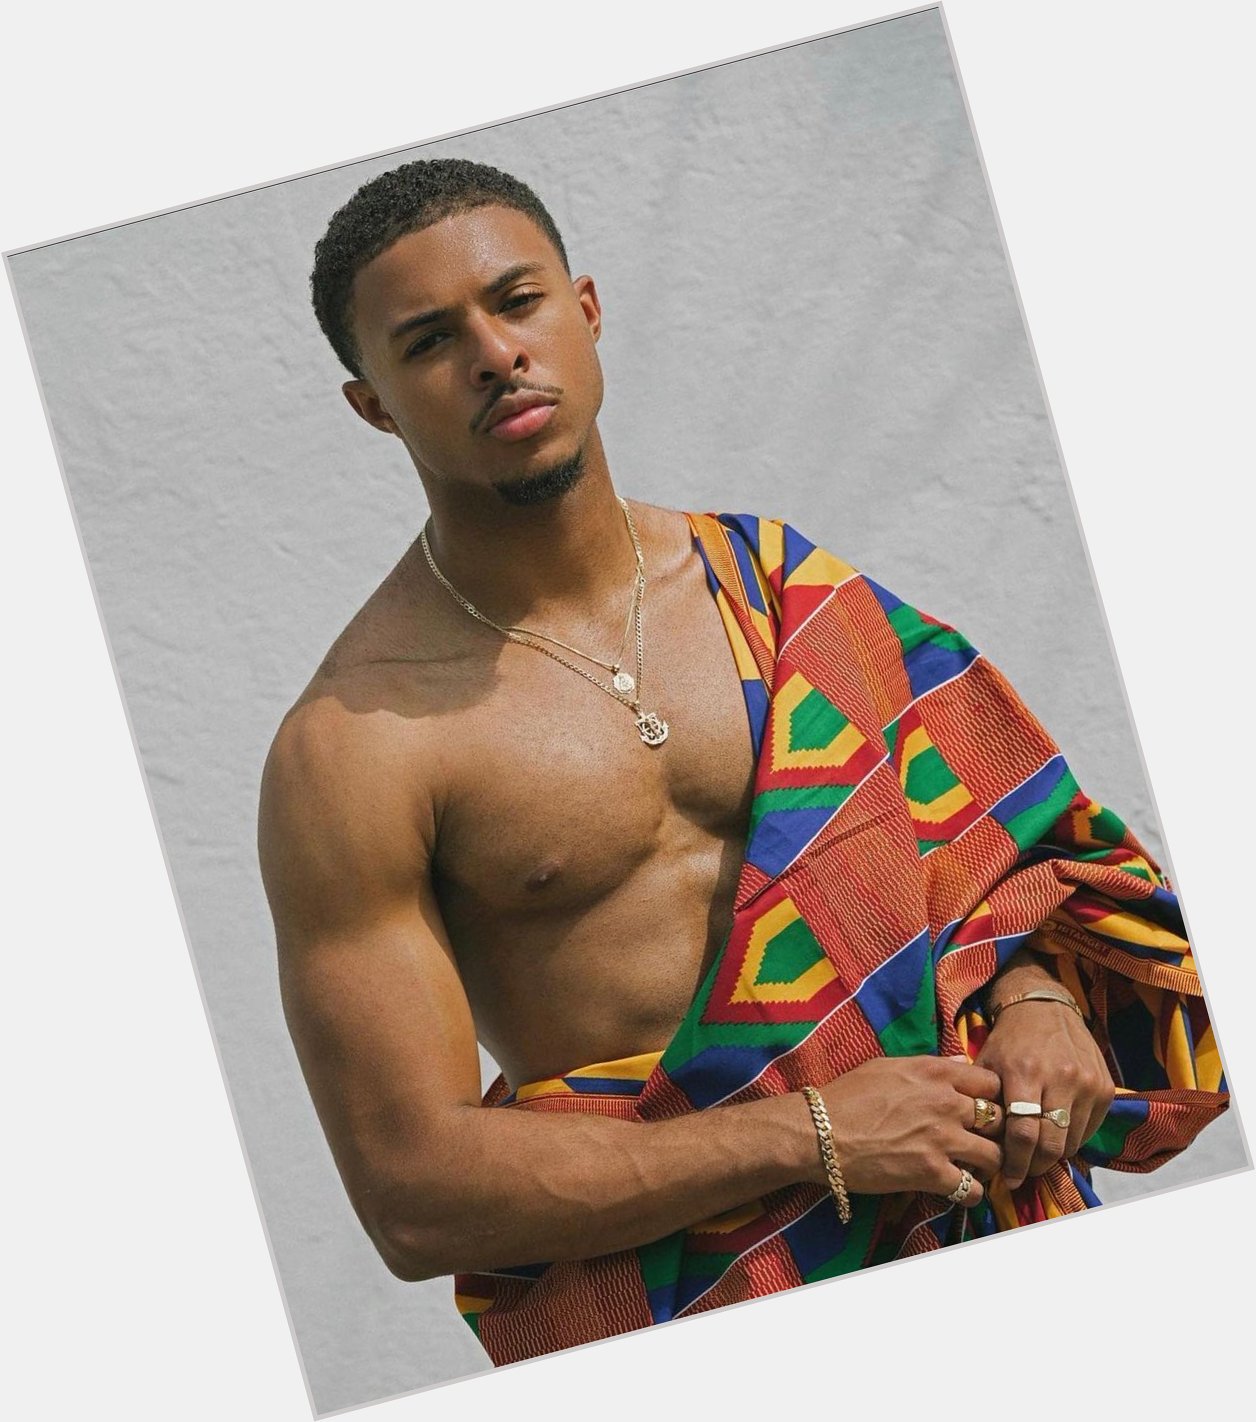 Please Join Us In Wishing A Happy 26th Birthday To The One And Only Diggy Simmons! 